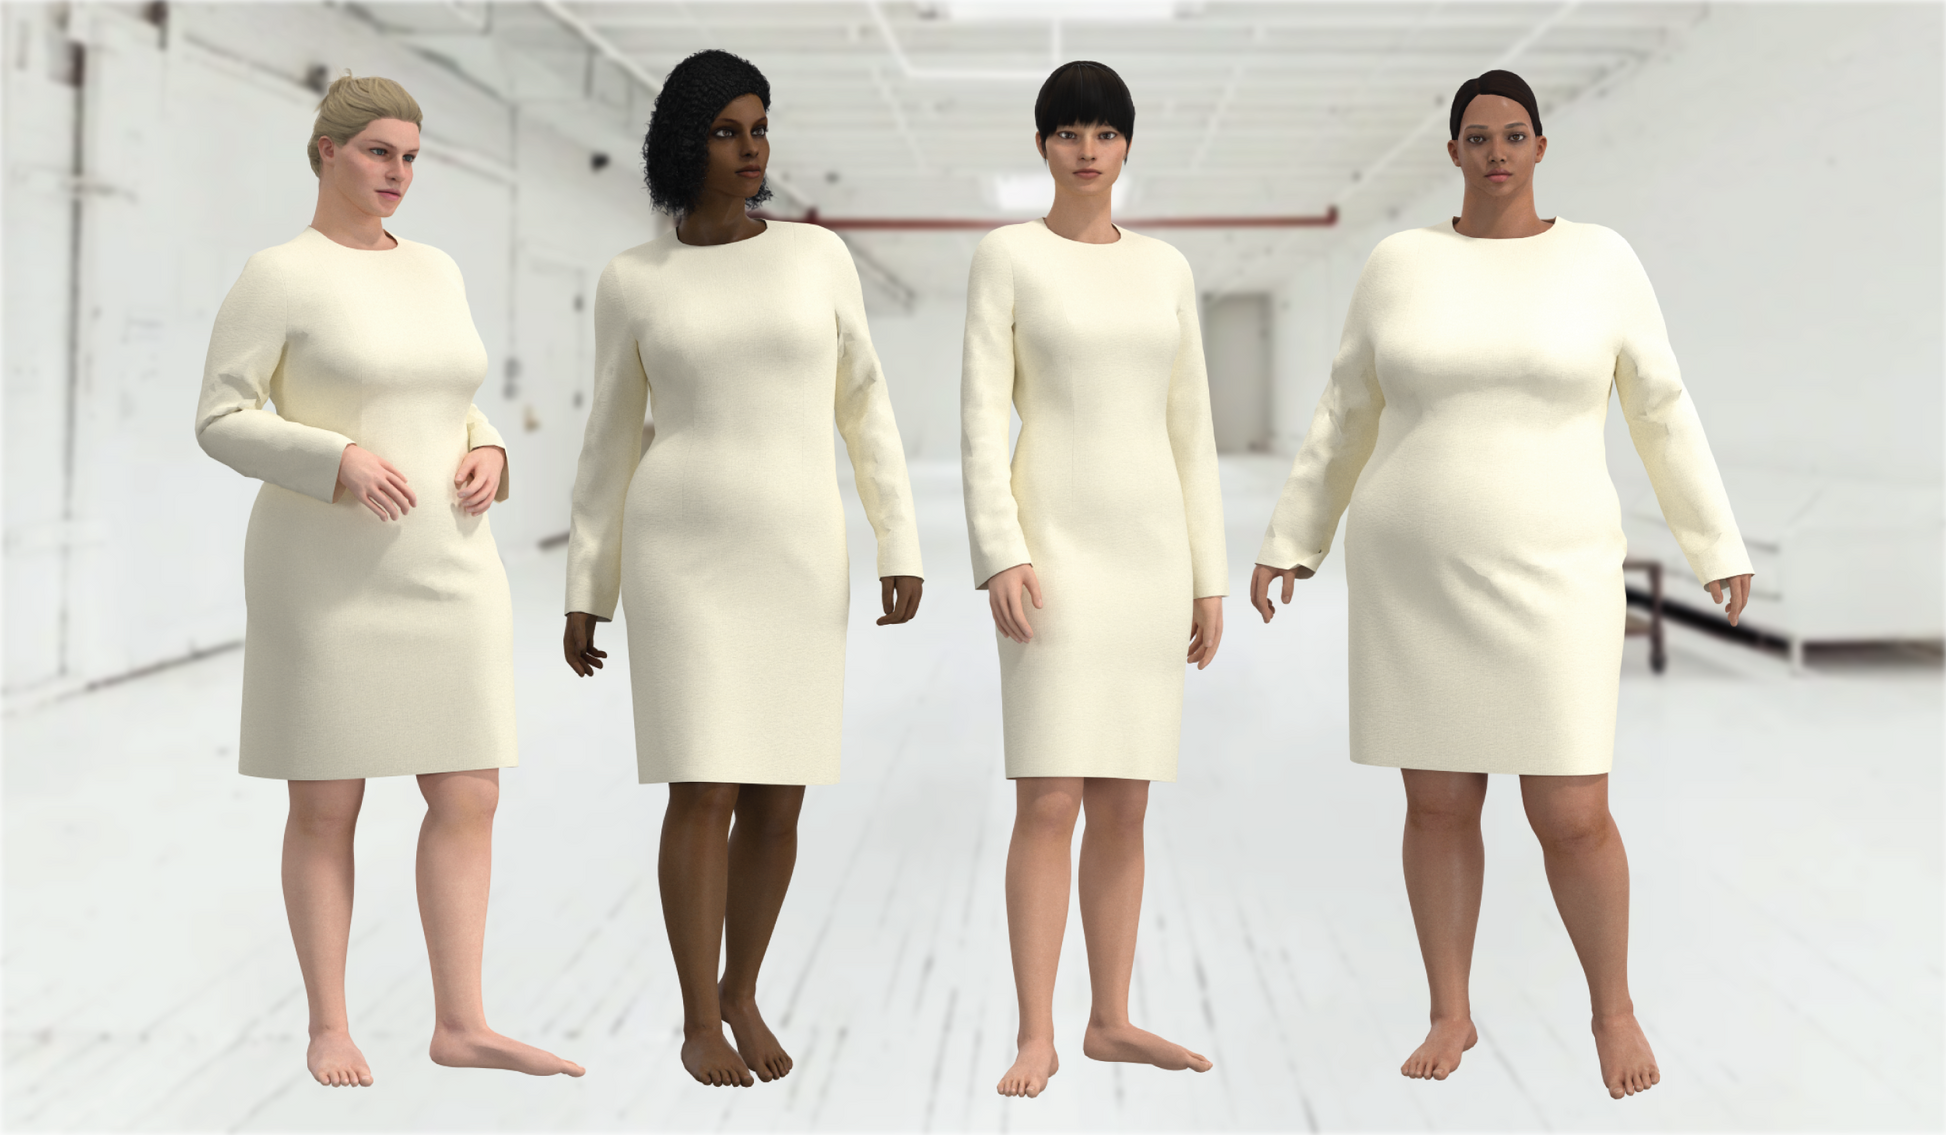 Clo3D basic block dress pattern - inclusive size. Automatically grades between straight size to plus size.